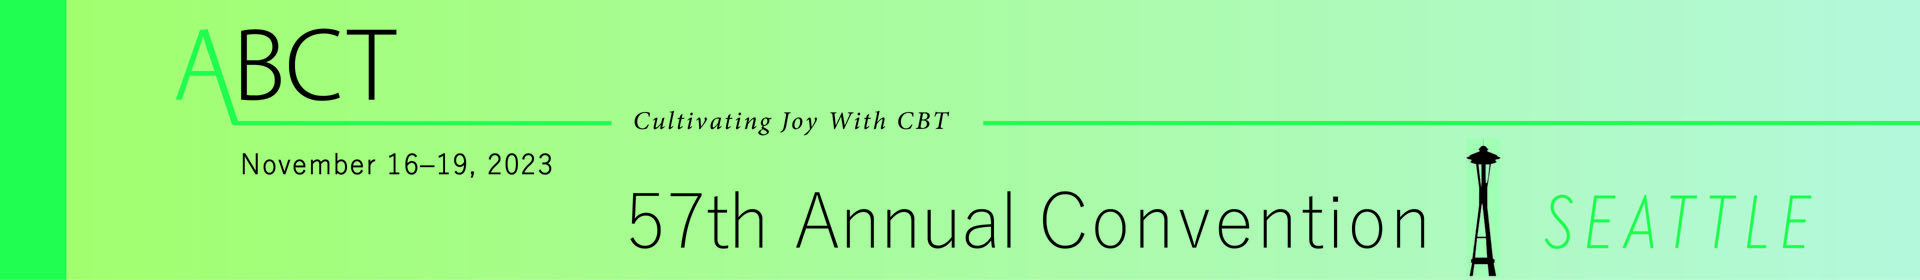 ABCT 2023 Annual Convention Event Banner